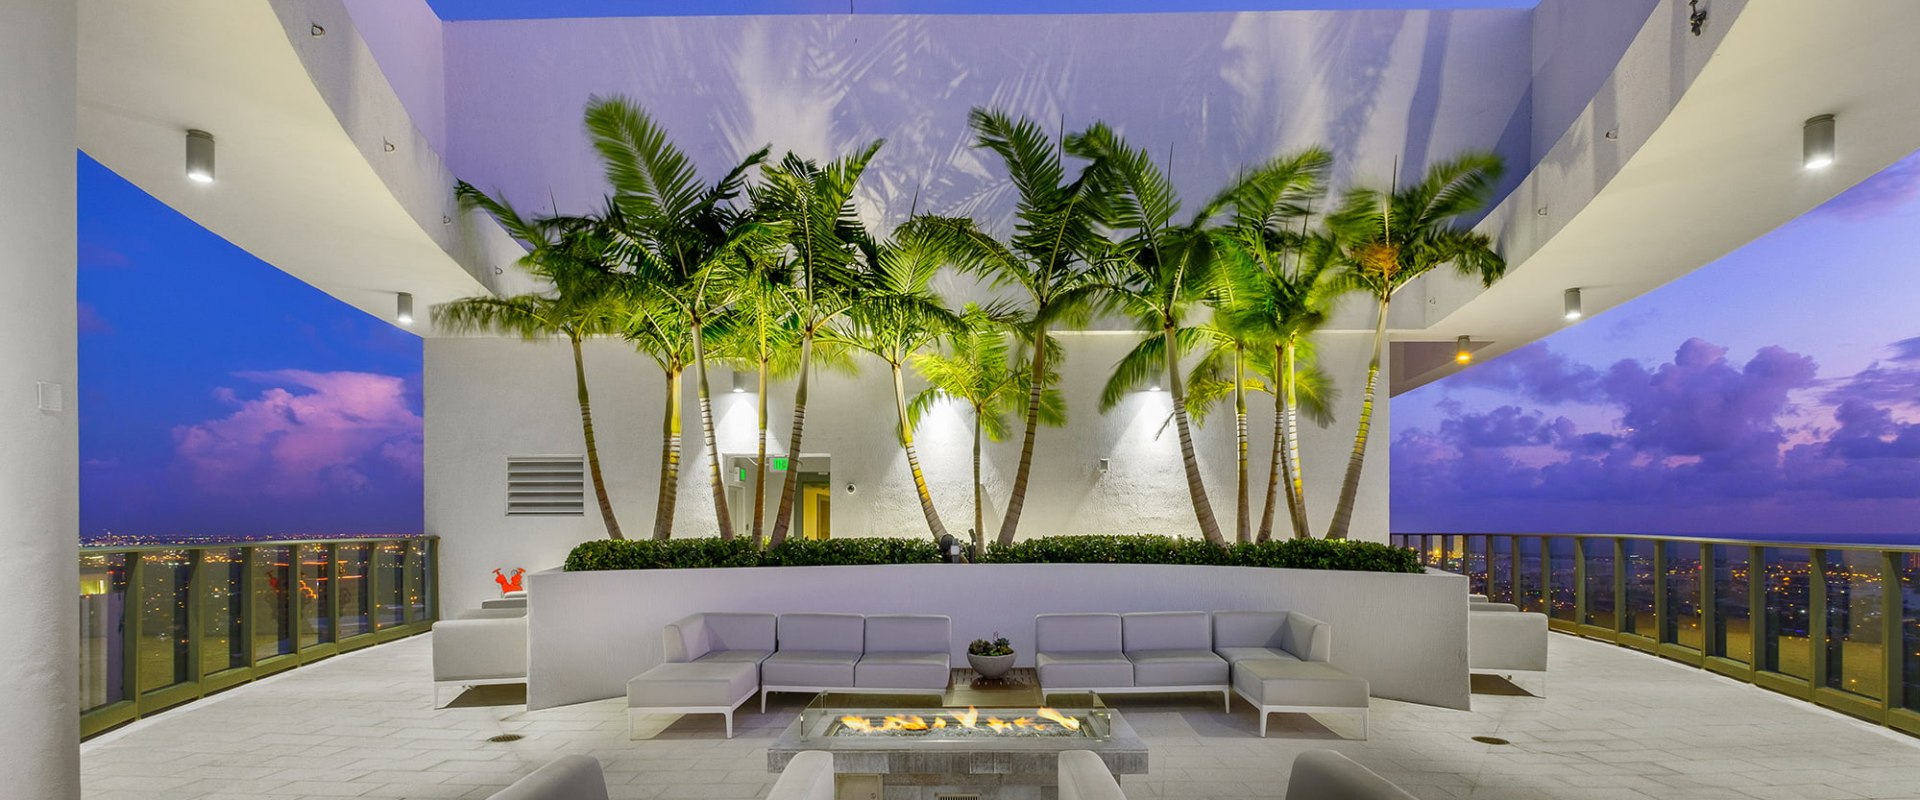 Exploring the Luxurious Penthouses with Fireplaces in Fort Lauderdale